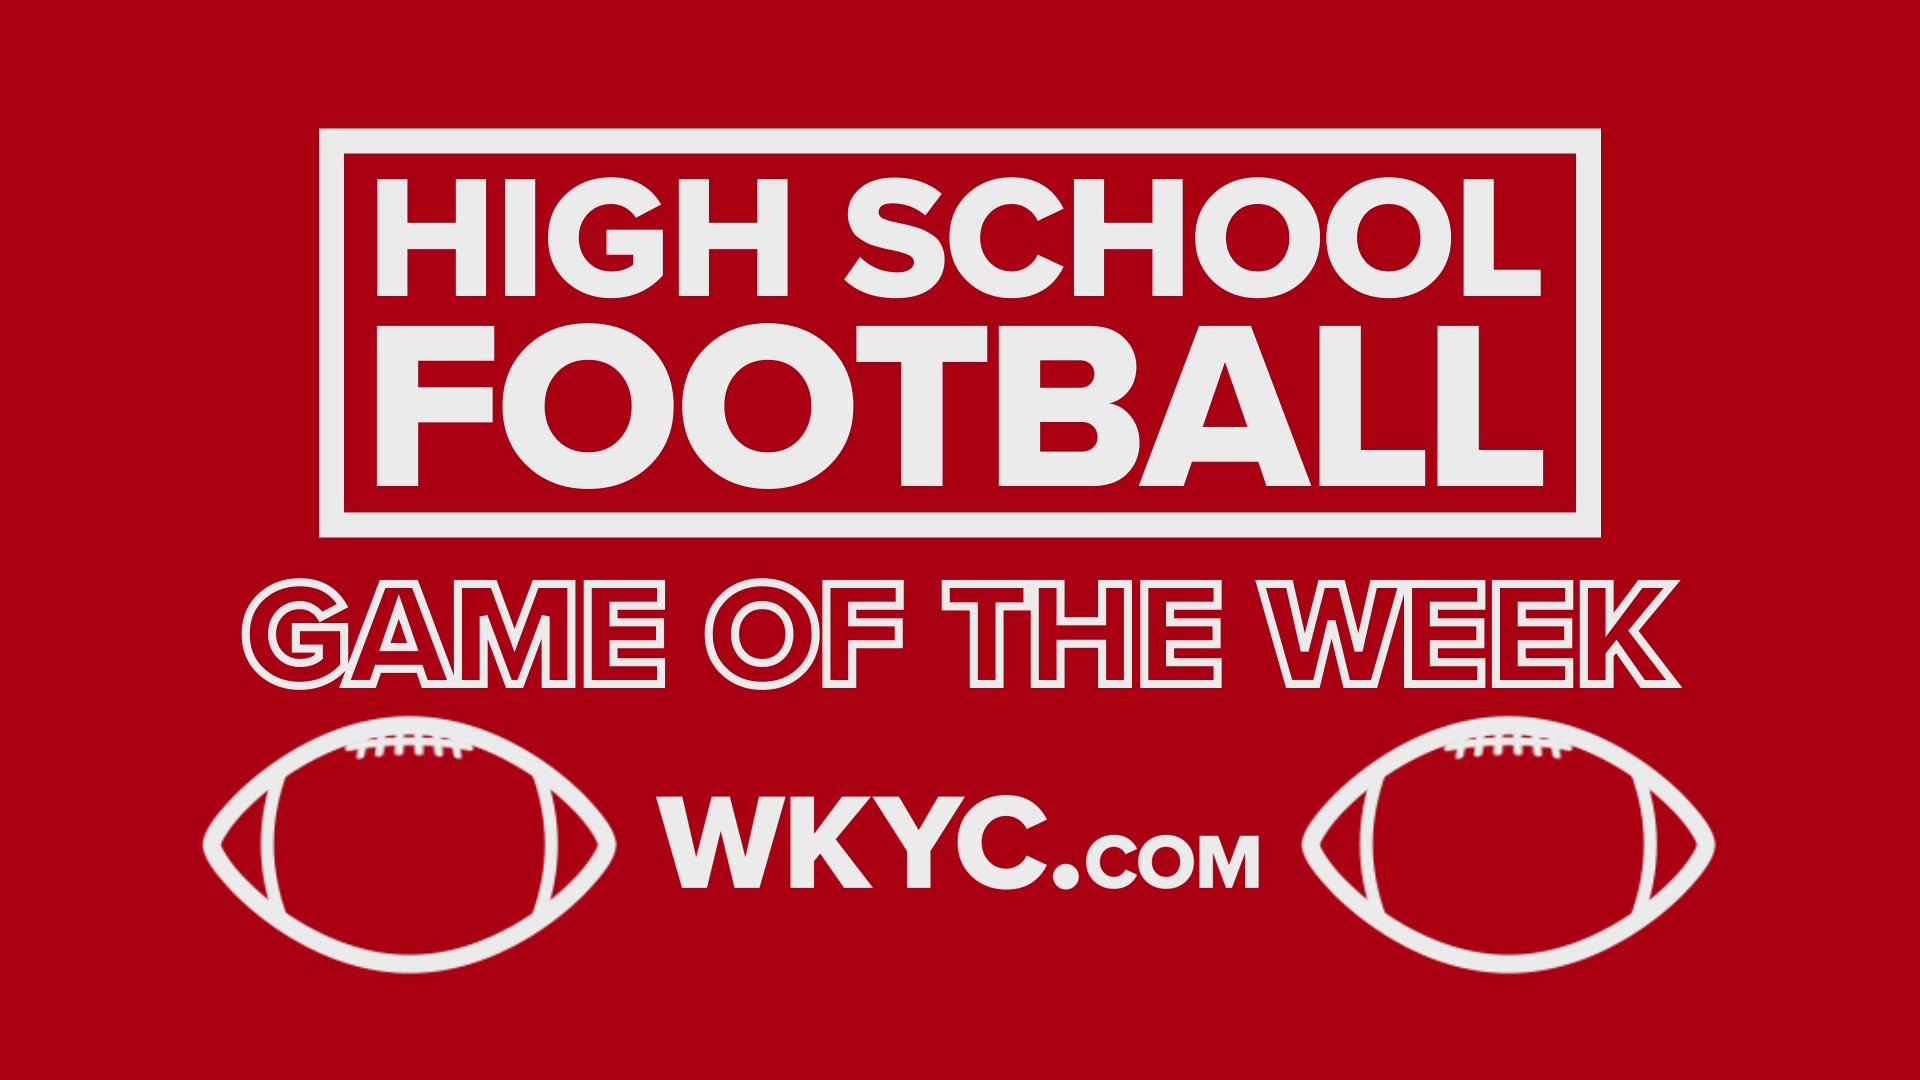 Wadsworth beats Medina 28-7 in WKYC.com's Game of the Week; St. Ignatius gets first win